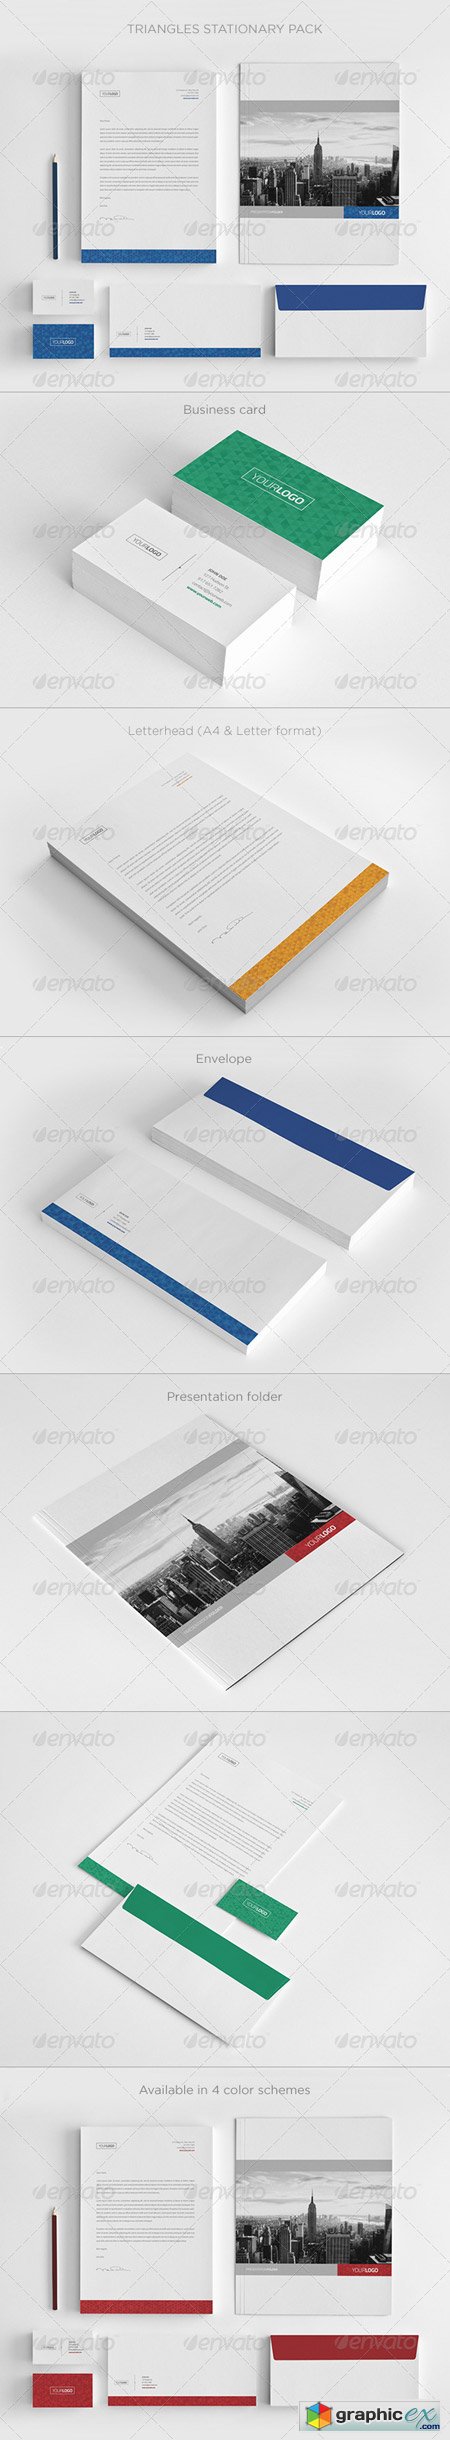 Real Estate Stationary Pack